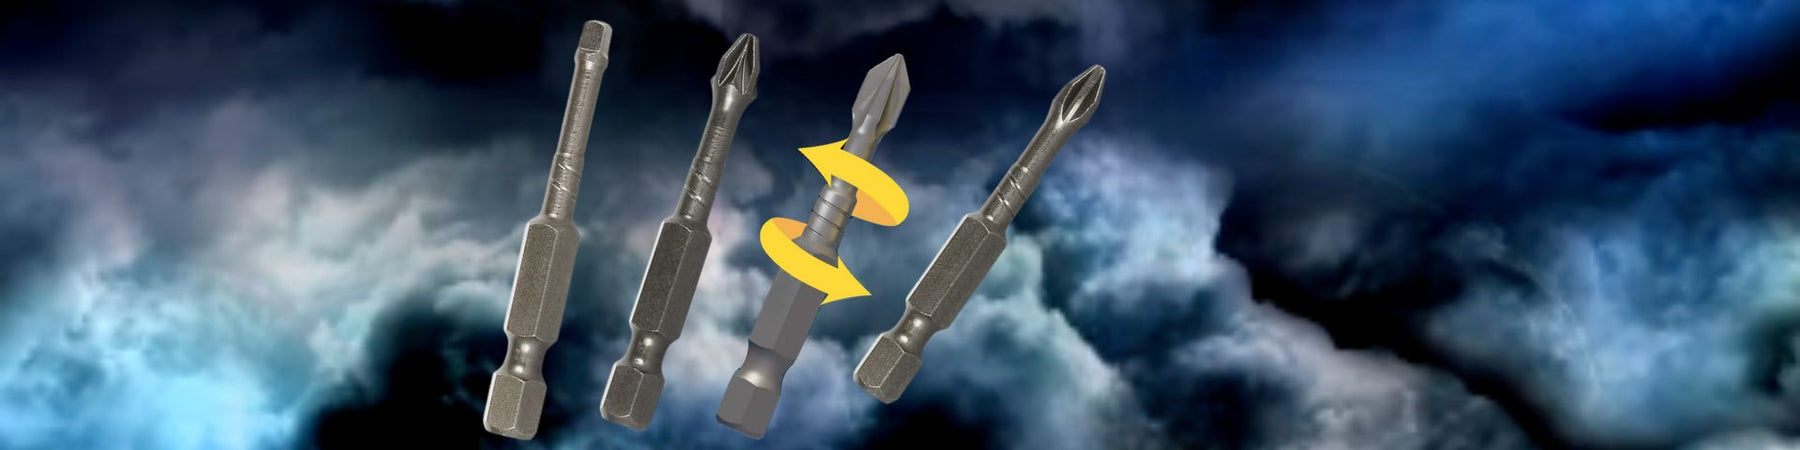 See why the Thunderzone Screwdriver bits last longer!